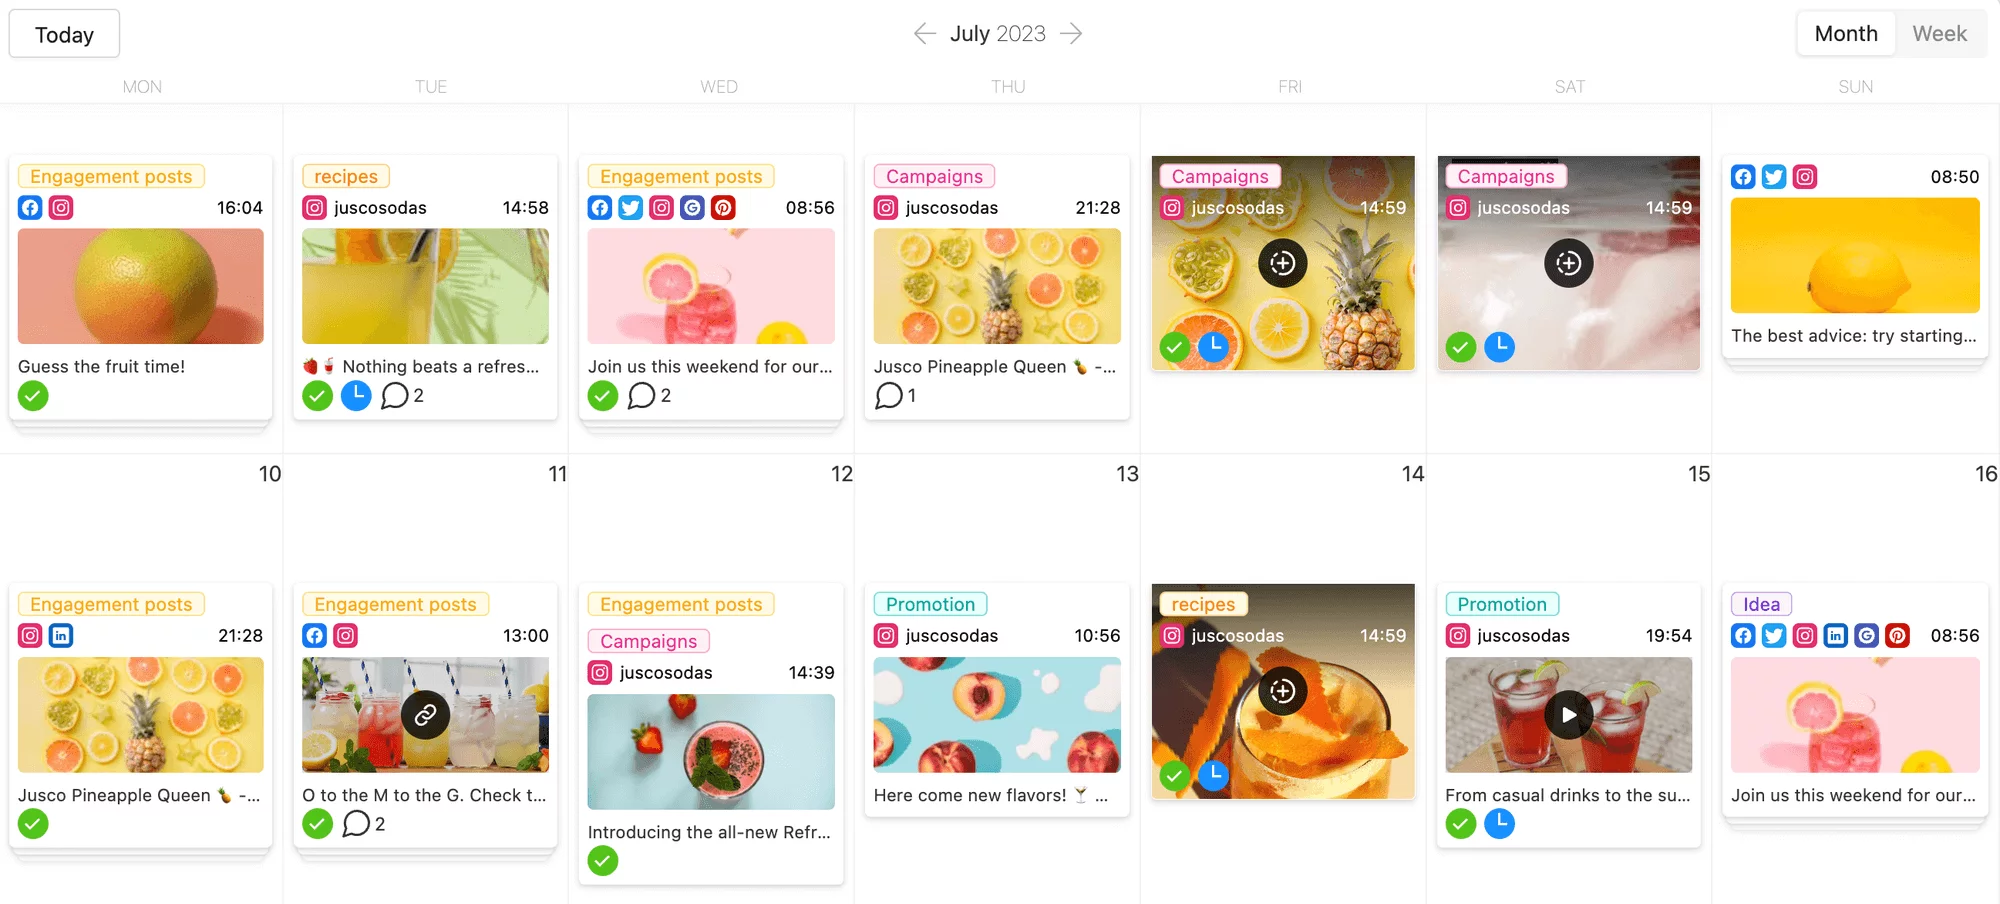 Social media content calendar in Planable displaying scheduled posts of different platforms with images of fruit drinks and promotions